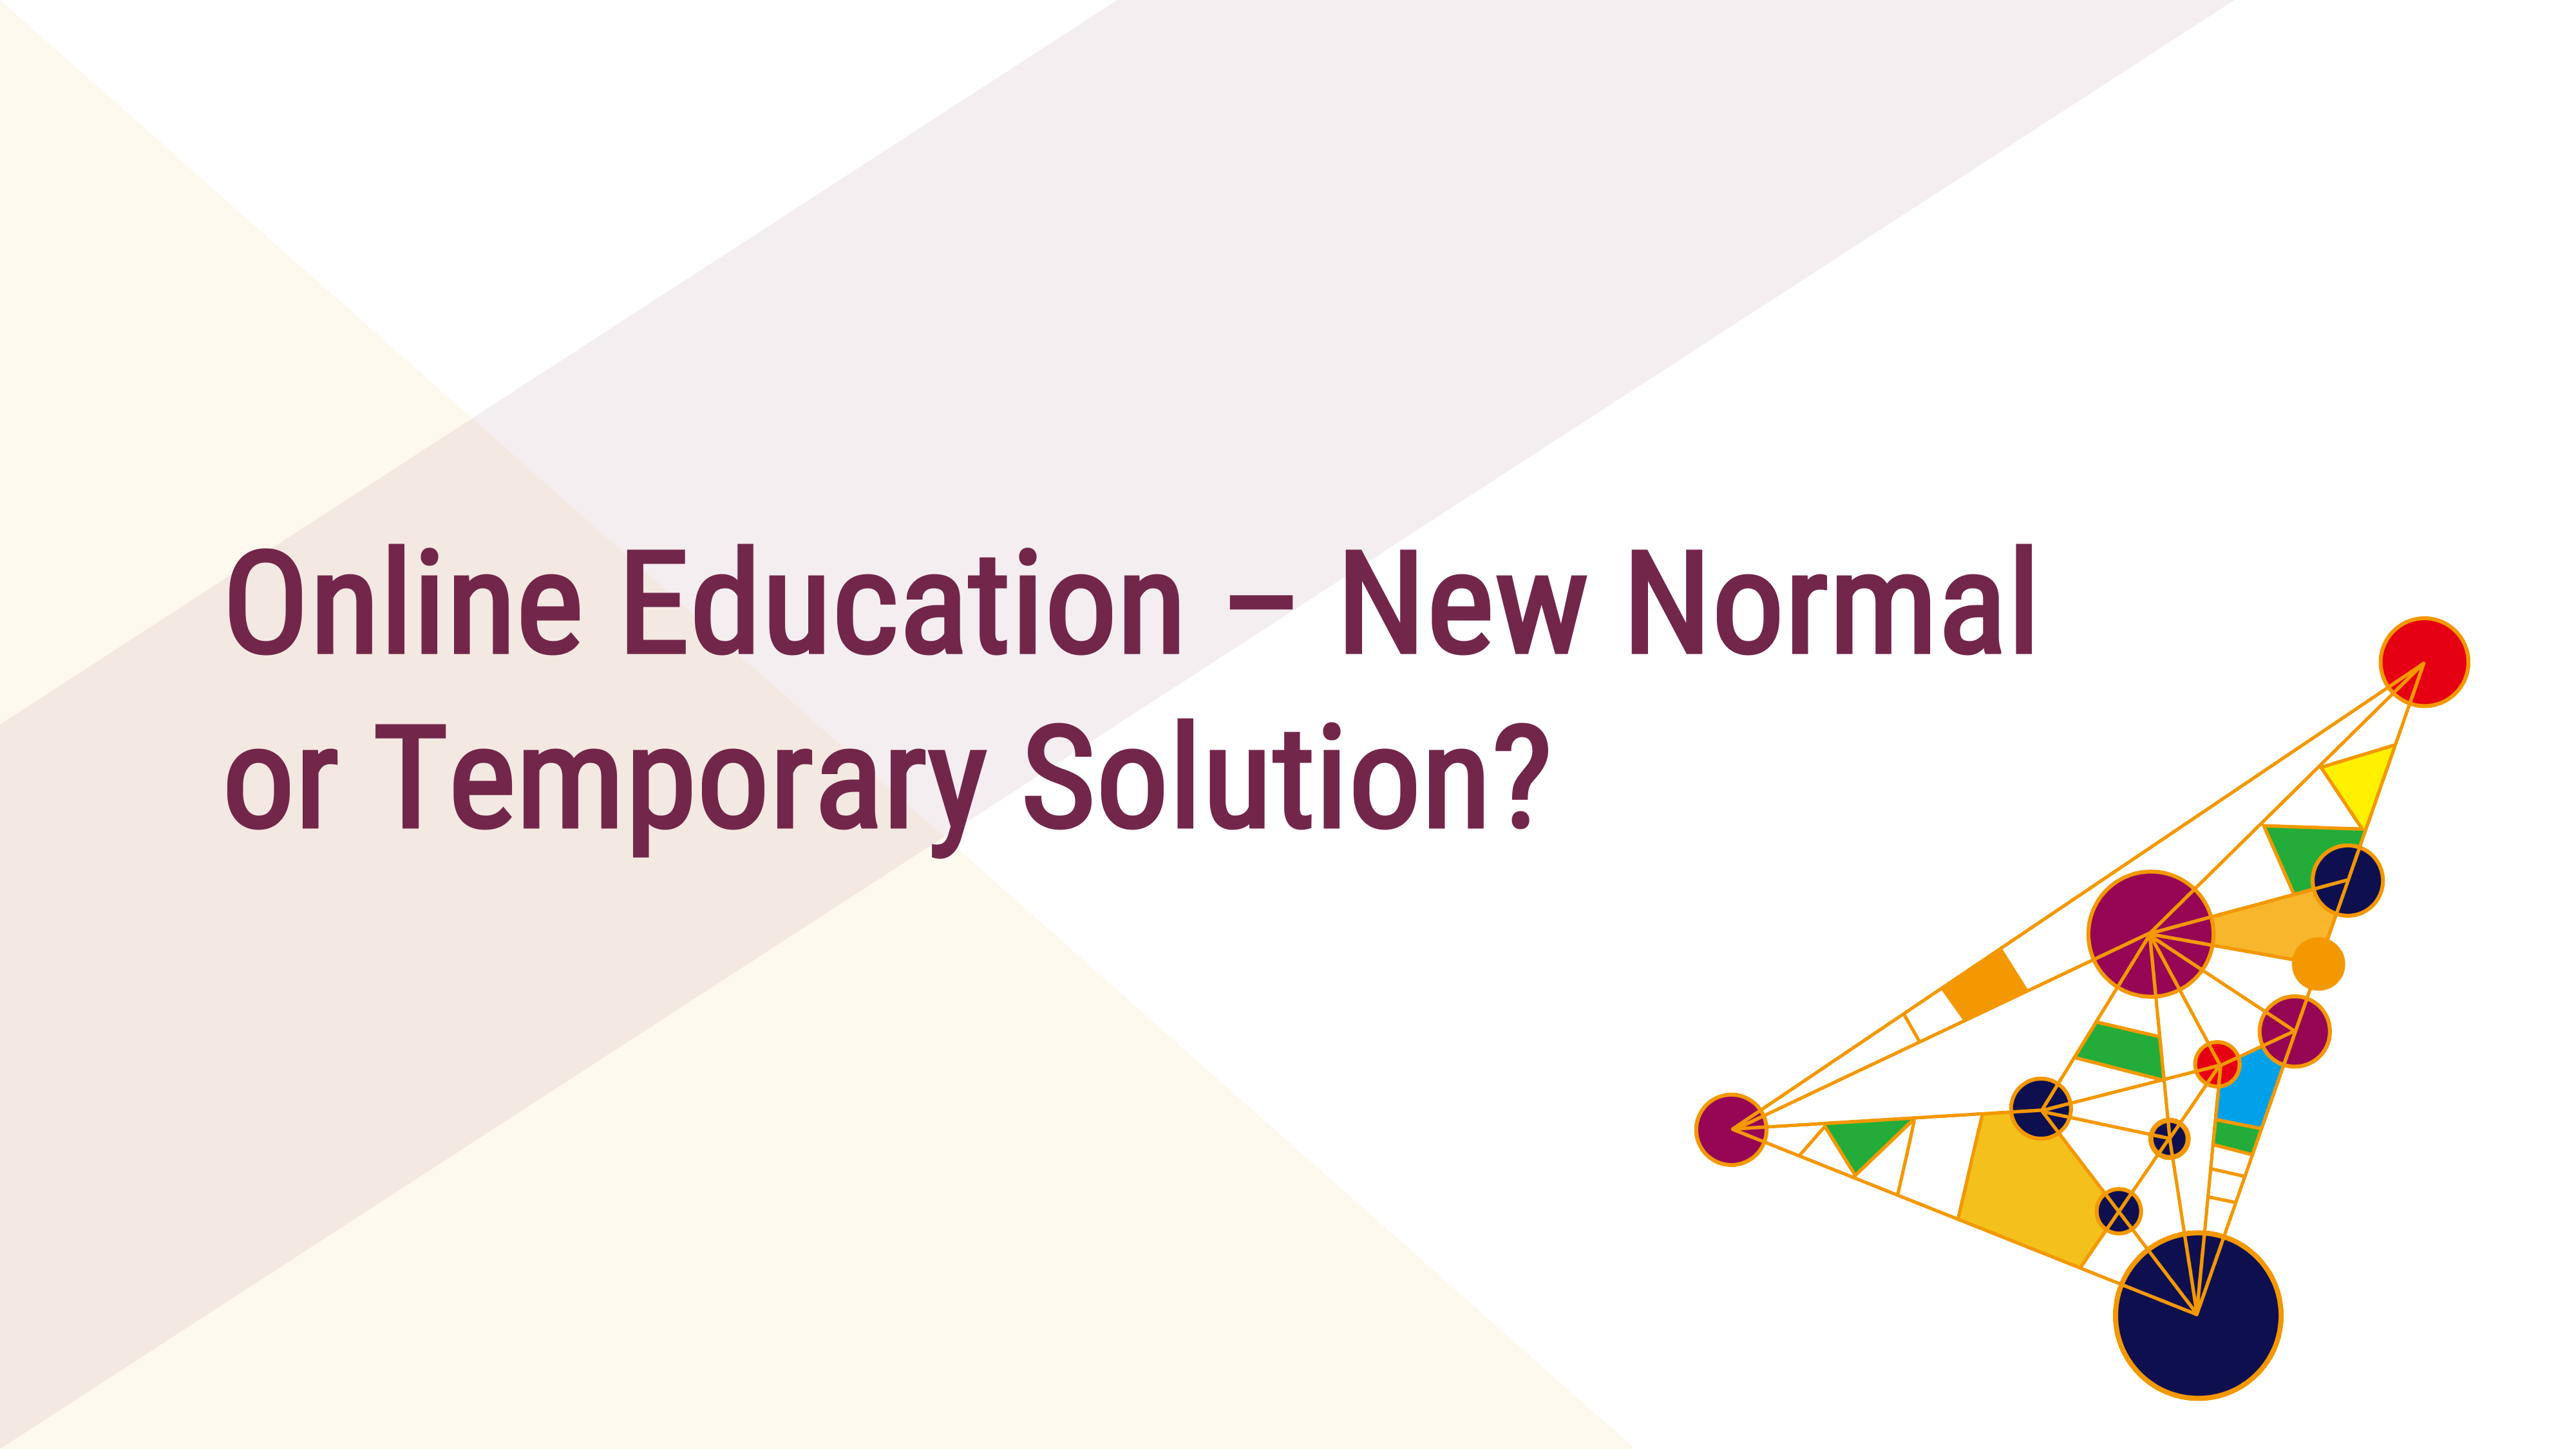 U-INTOSAI Invites to Enroll to a New Course “Online Education: New Normal or Temporary Solution?”